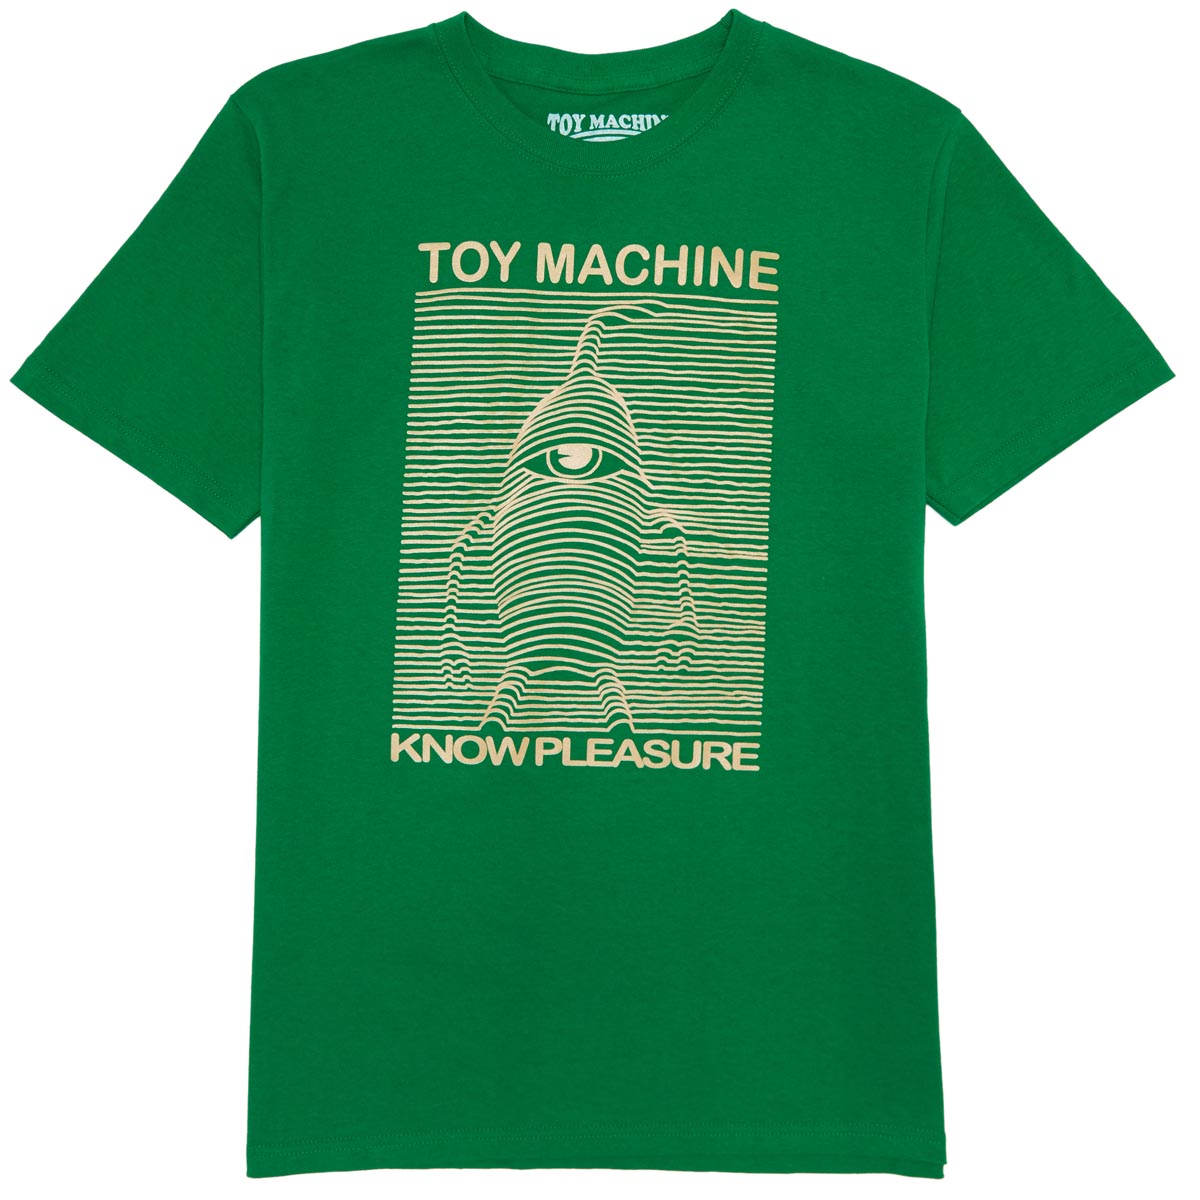 Toy Machine Toy Division T-Shirt - Kelly Green image 1